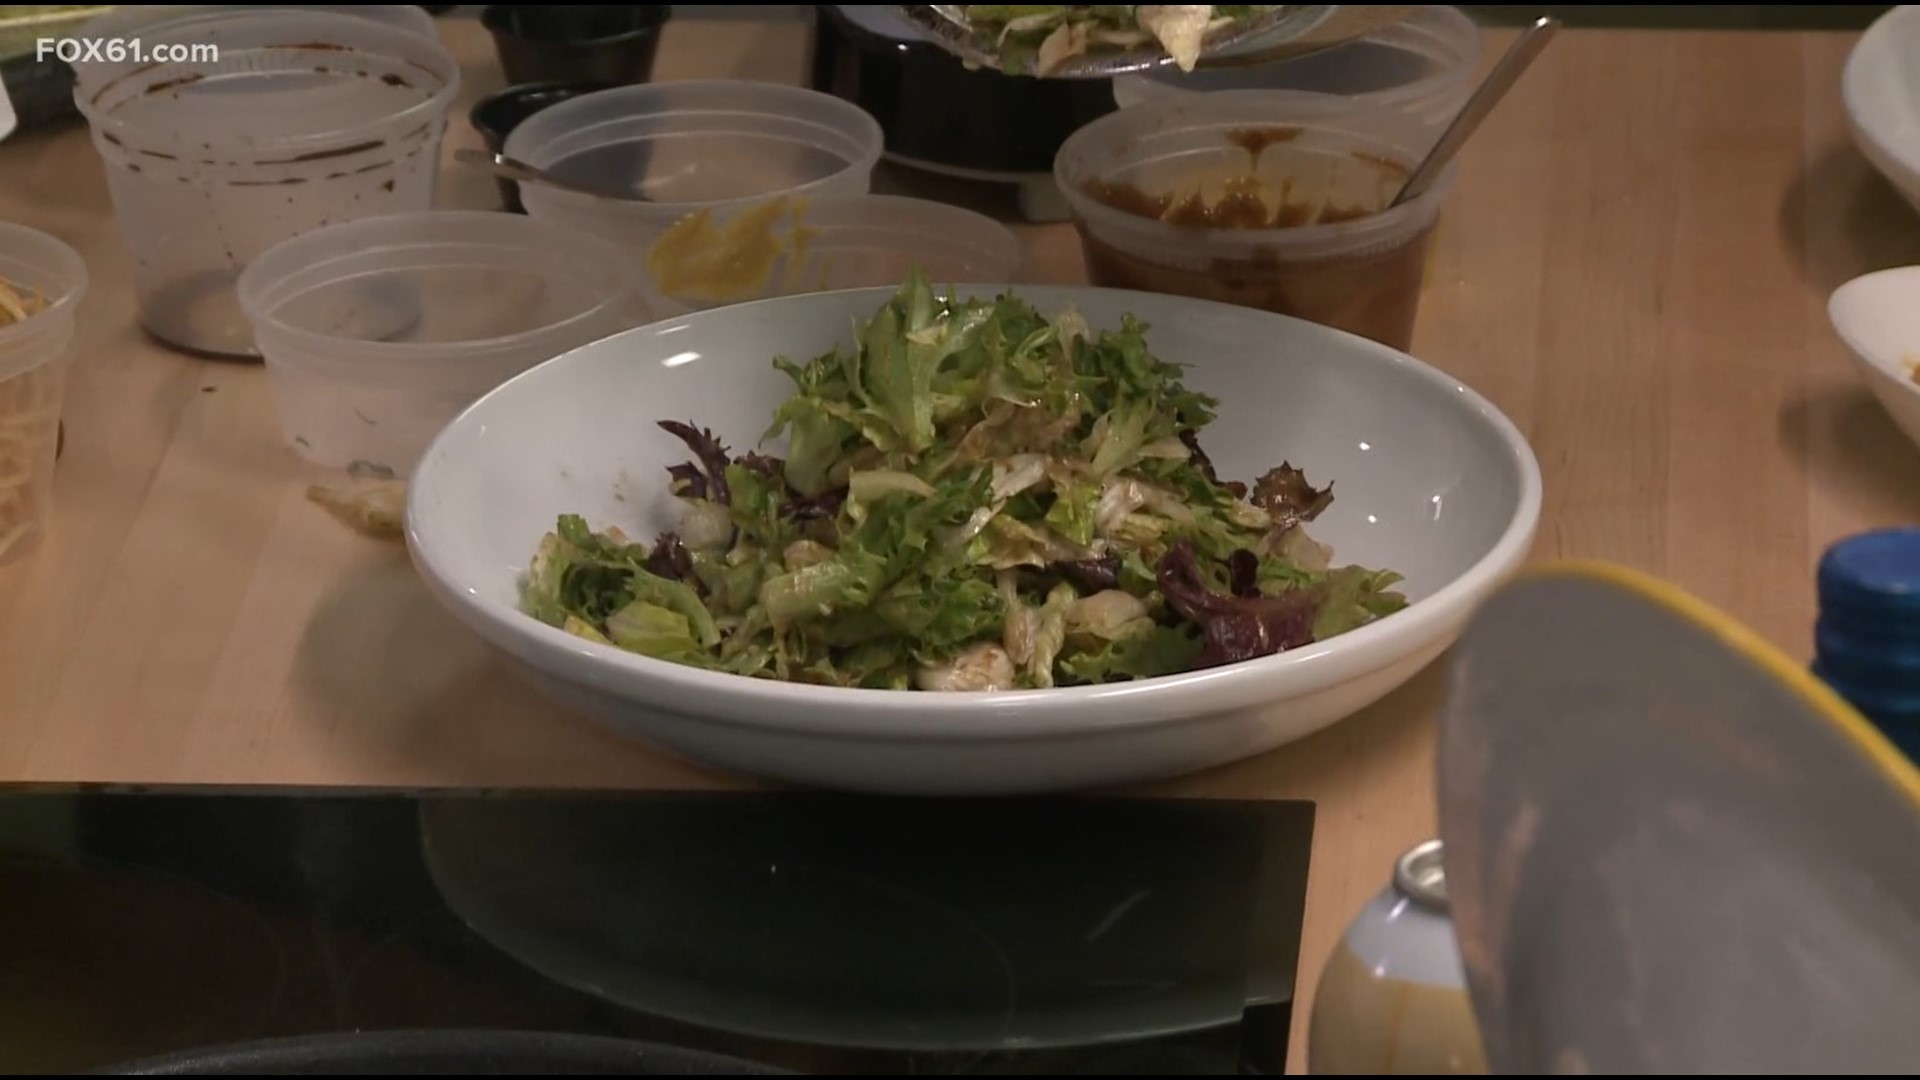 BRIO Italian Grille at Westfarms shares with us their delicious Salmon Salad recipe!